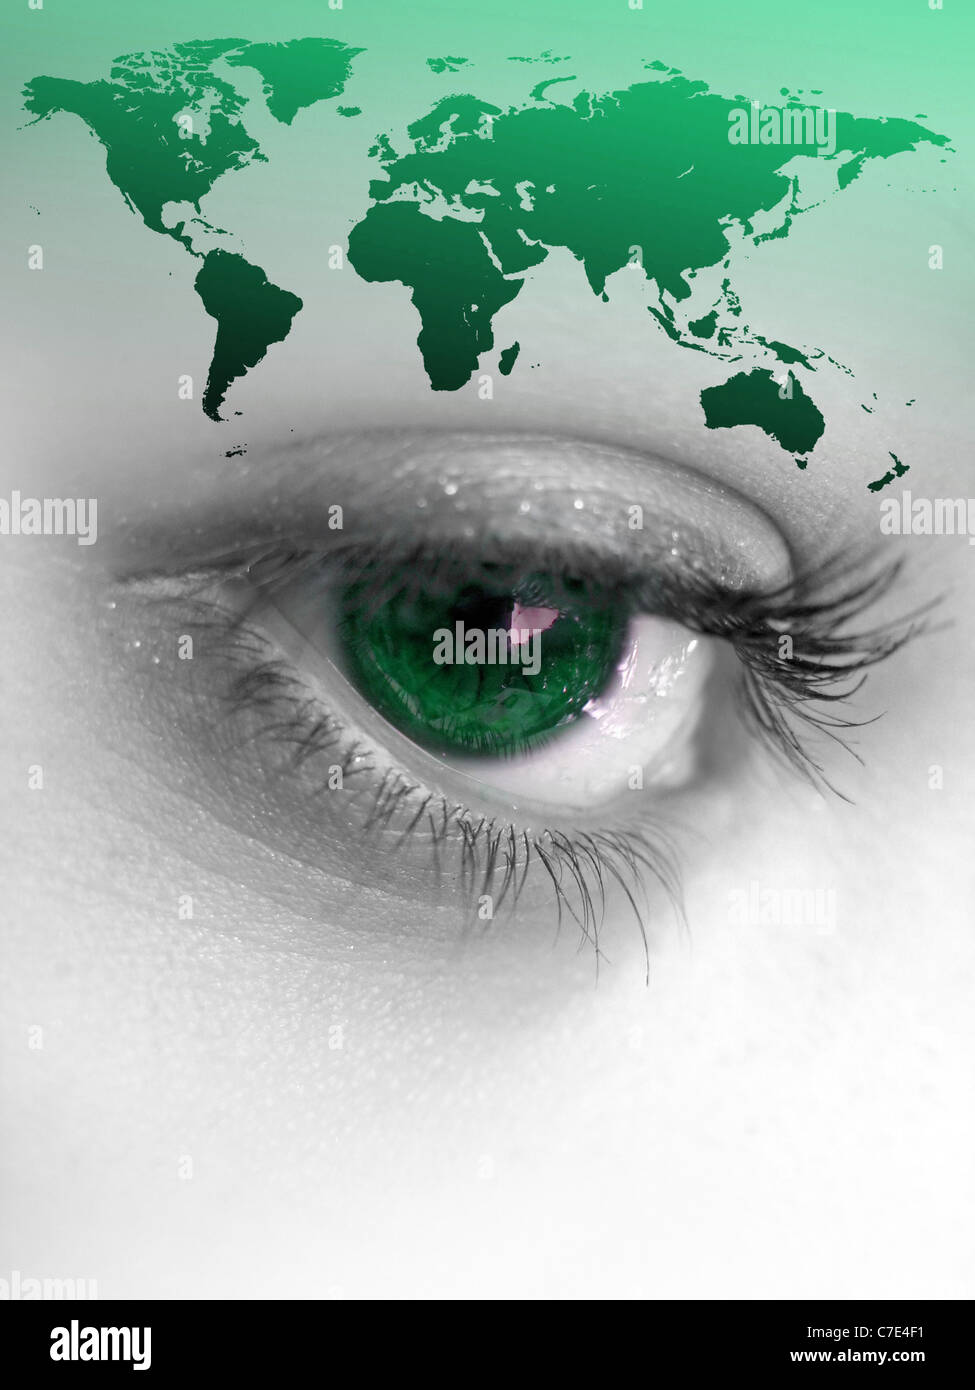 Montage of a pretty color isolated eye with the world continents. Stock Photo